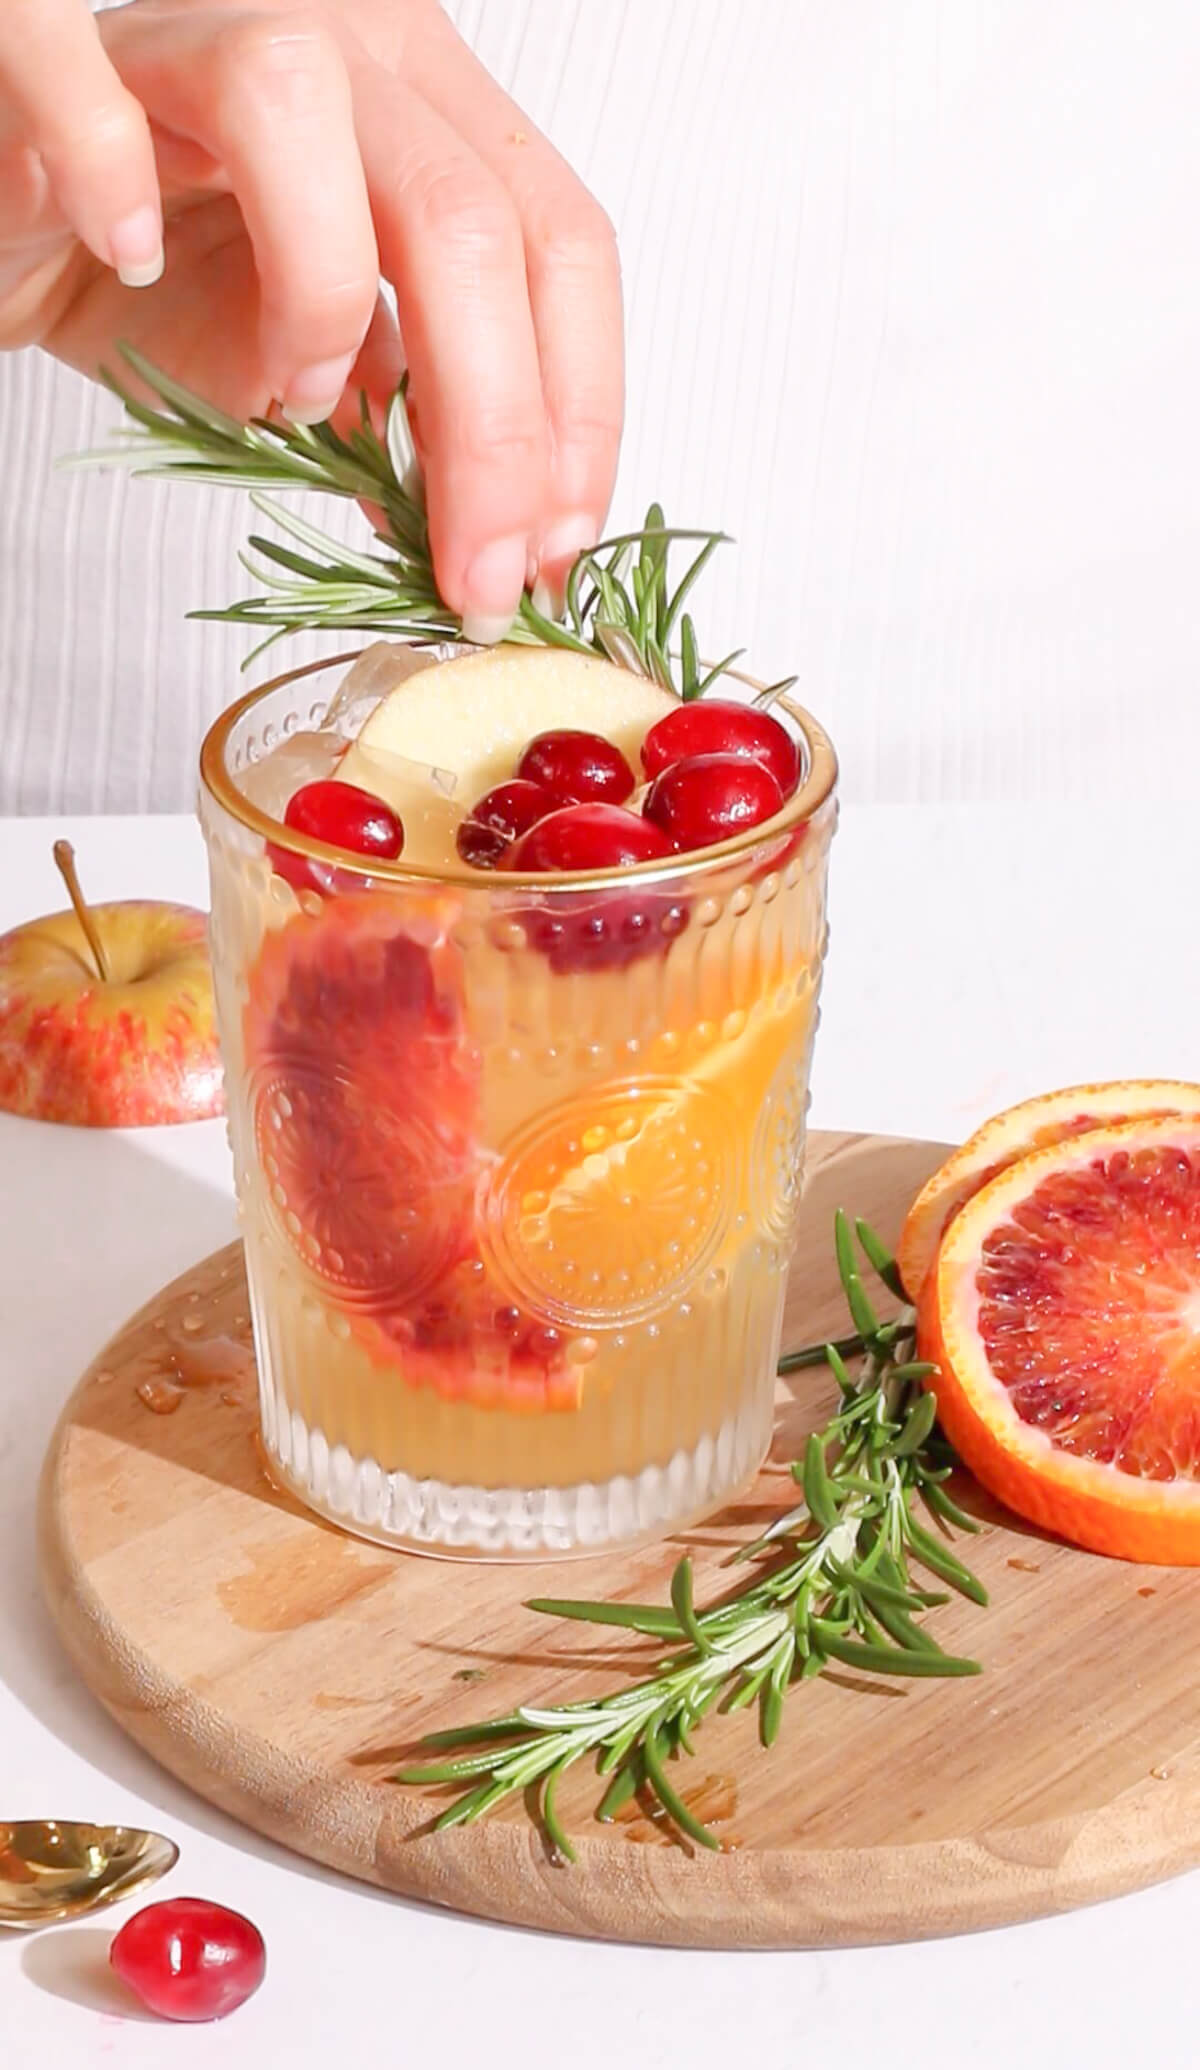 a fruity punch in a intricate glass with a gold rim garnished with rosemary cranberries apples and pear with a hand touching the rosemary garnish.